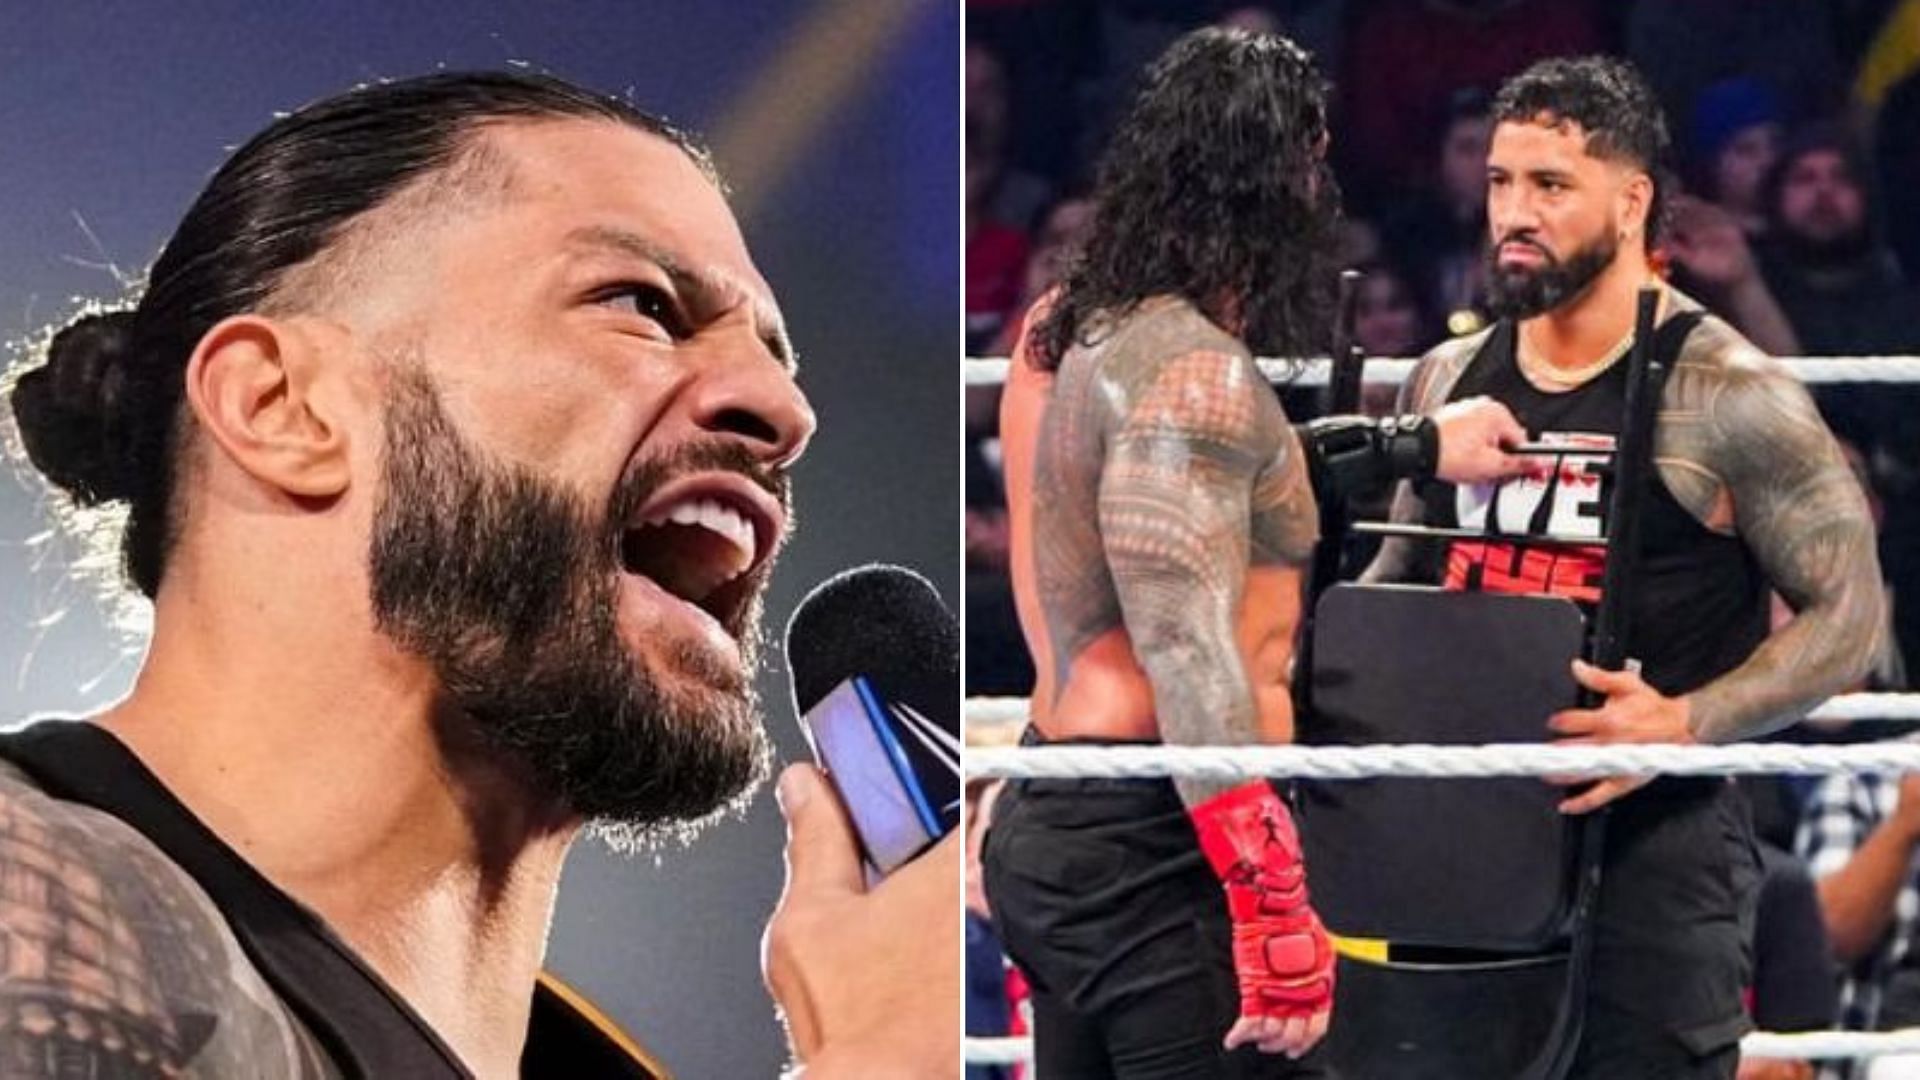 Roman Reigns and Solo SIkoa vs. The Usos will take place at Money in the Bank on July 1st!